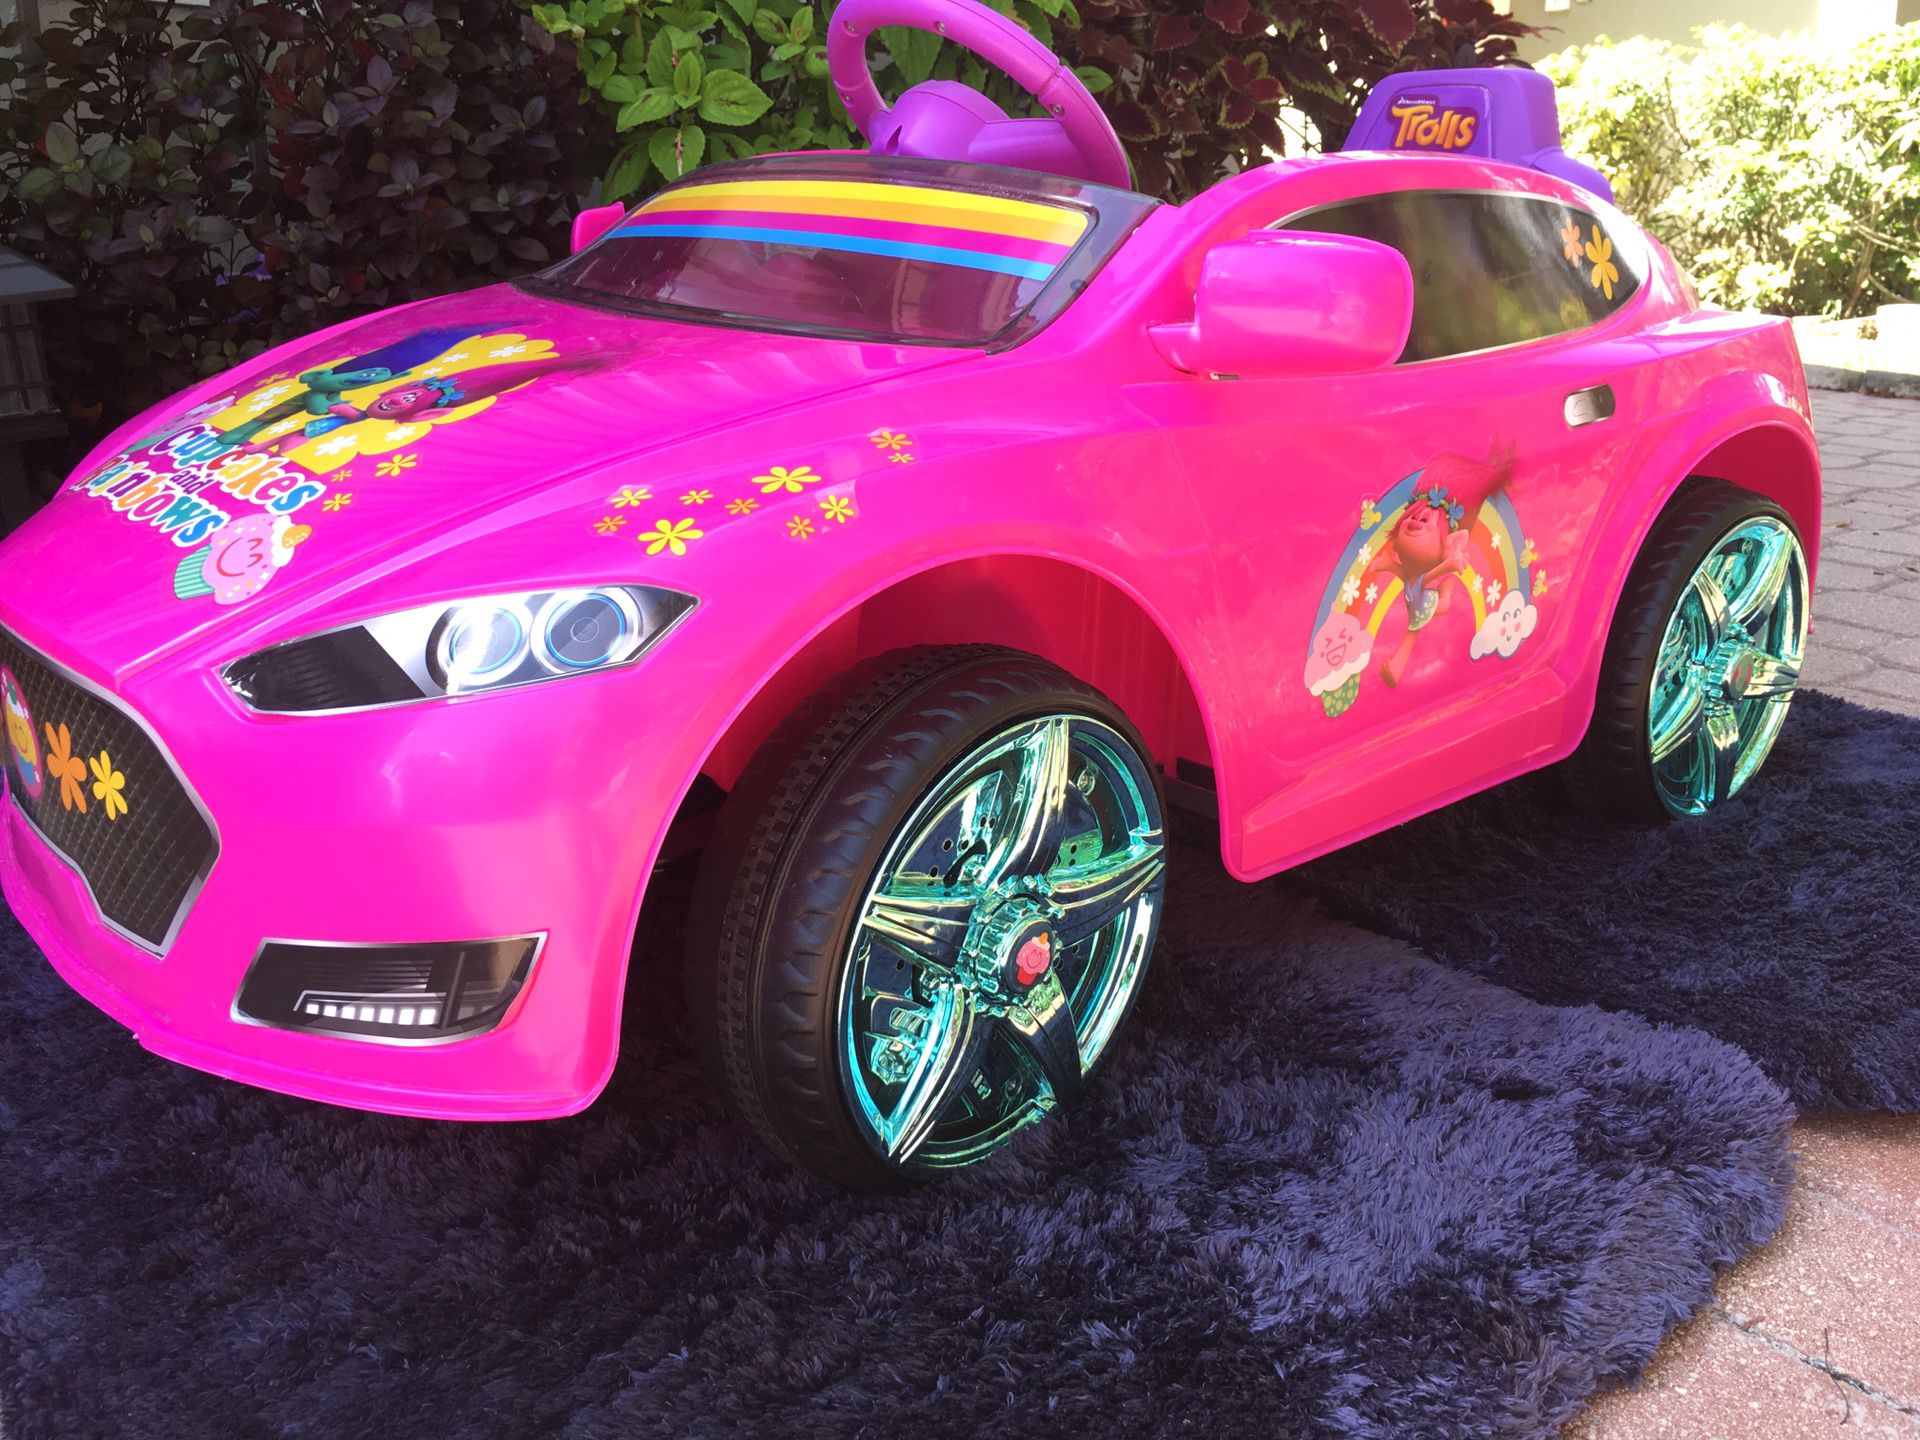 Hot Pink Power Wheels Toy Electric Car Girls Kids Like New